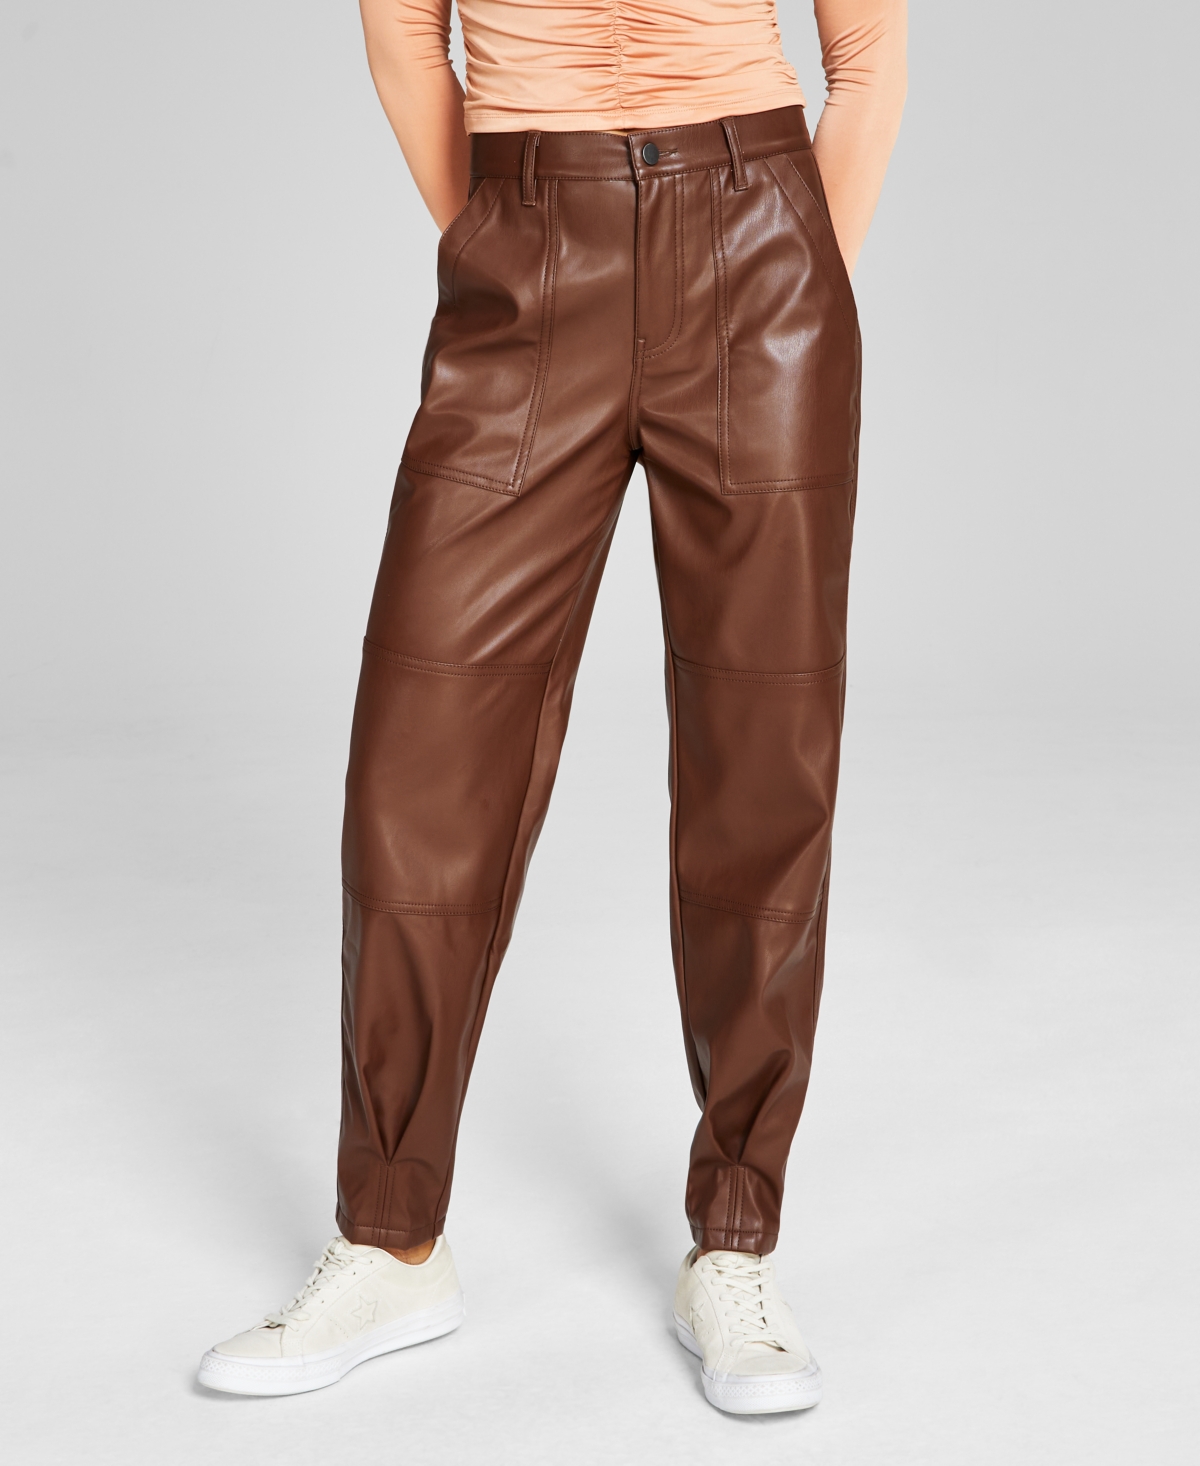  And Now This Women's Tapered Faux-Leather Utility Pants